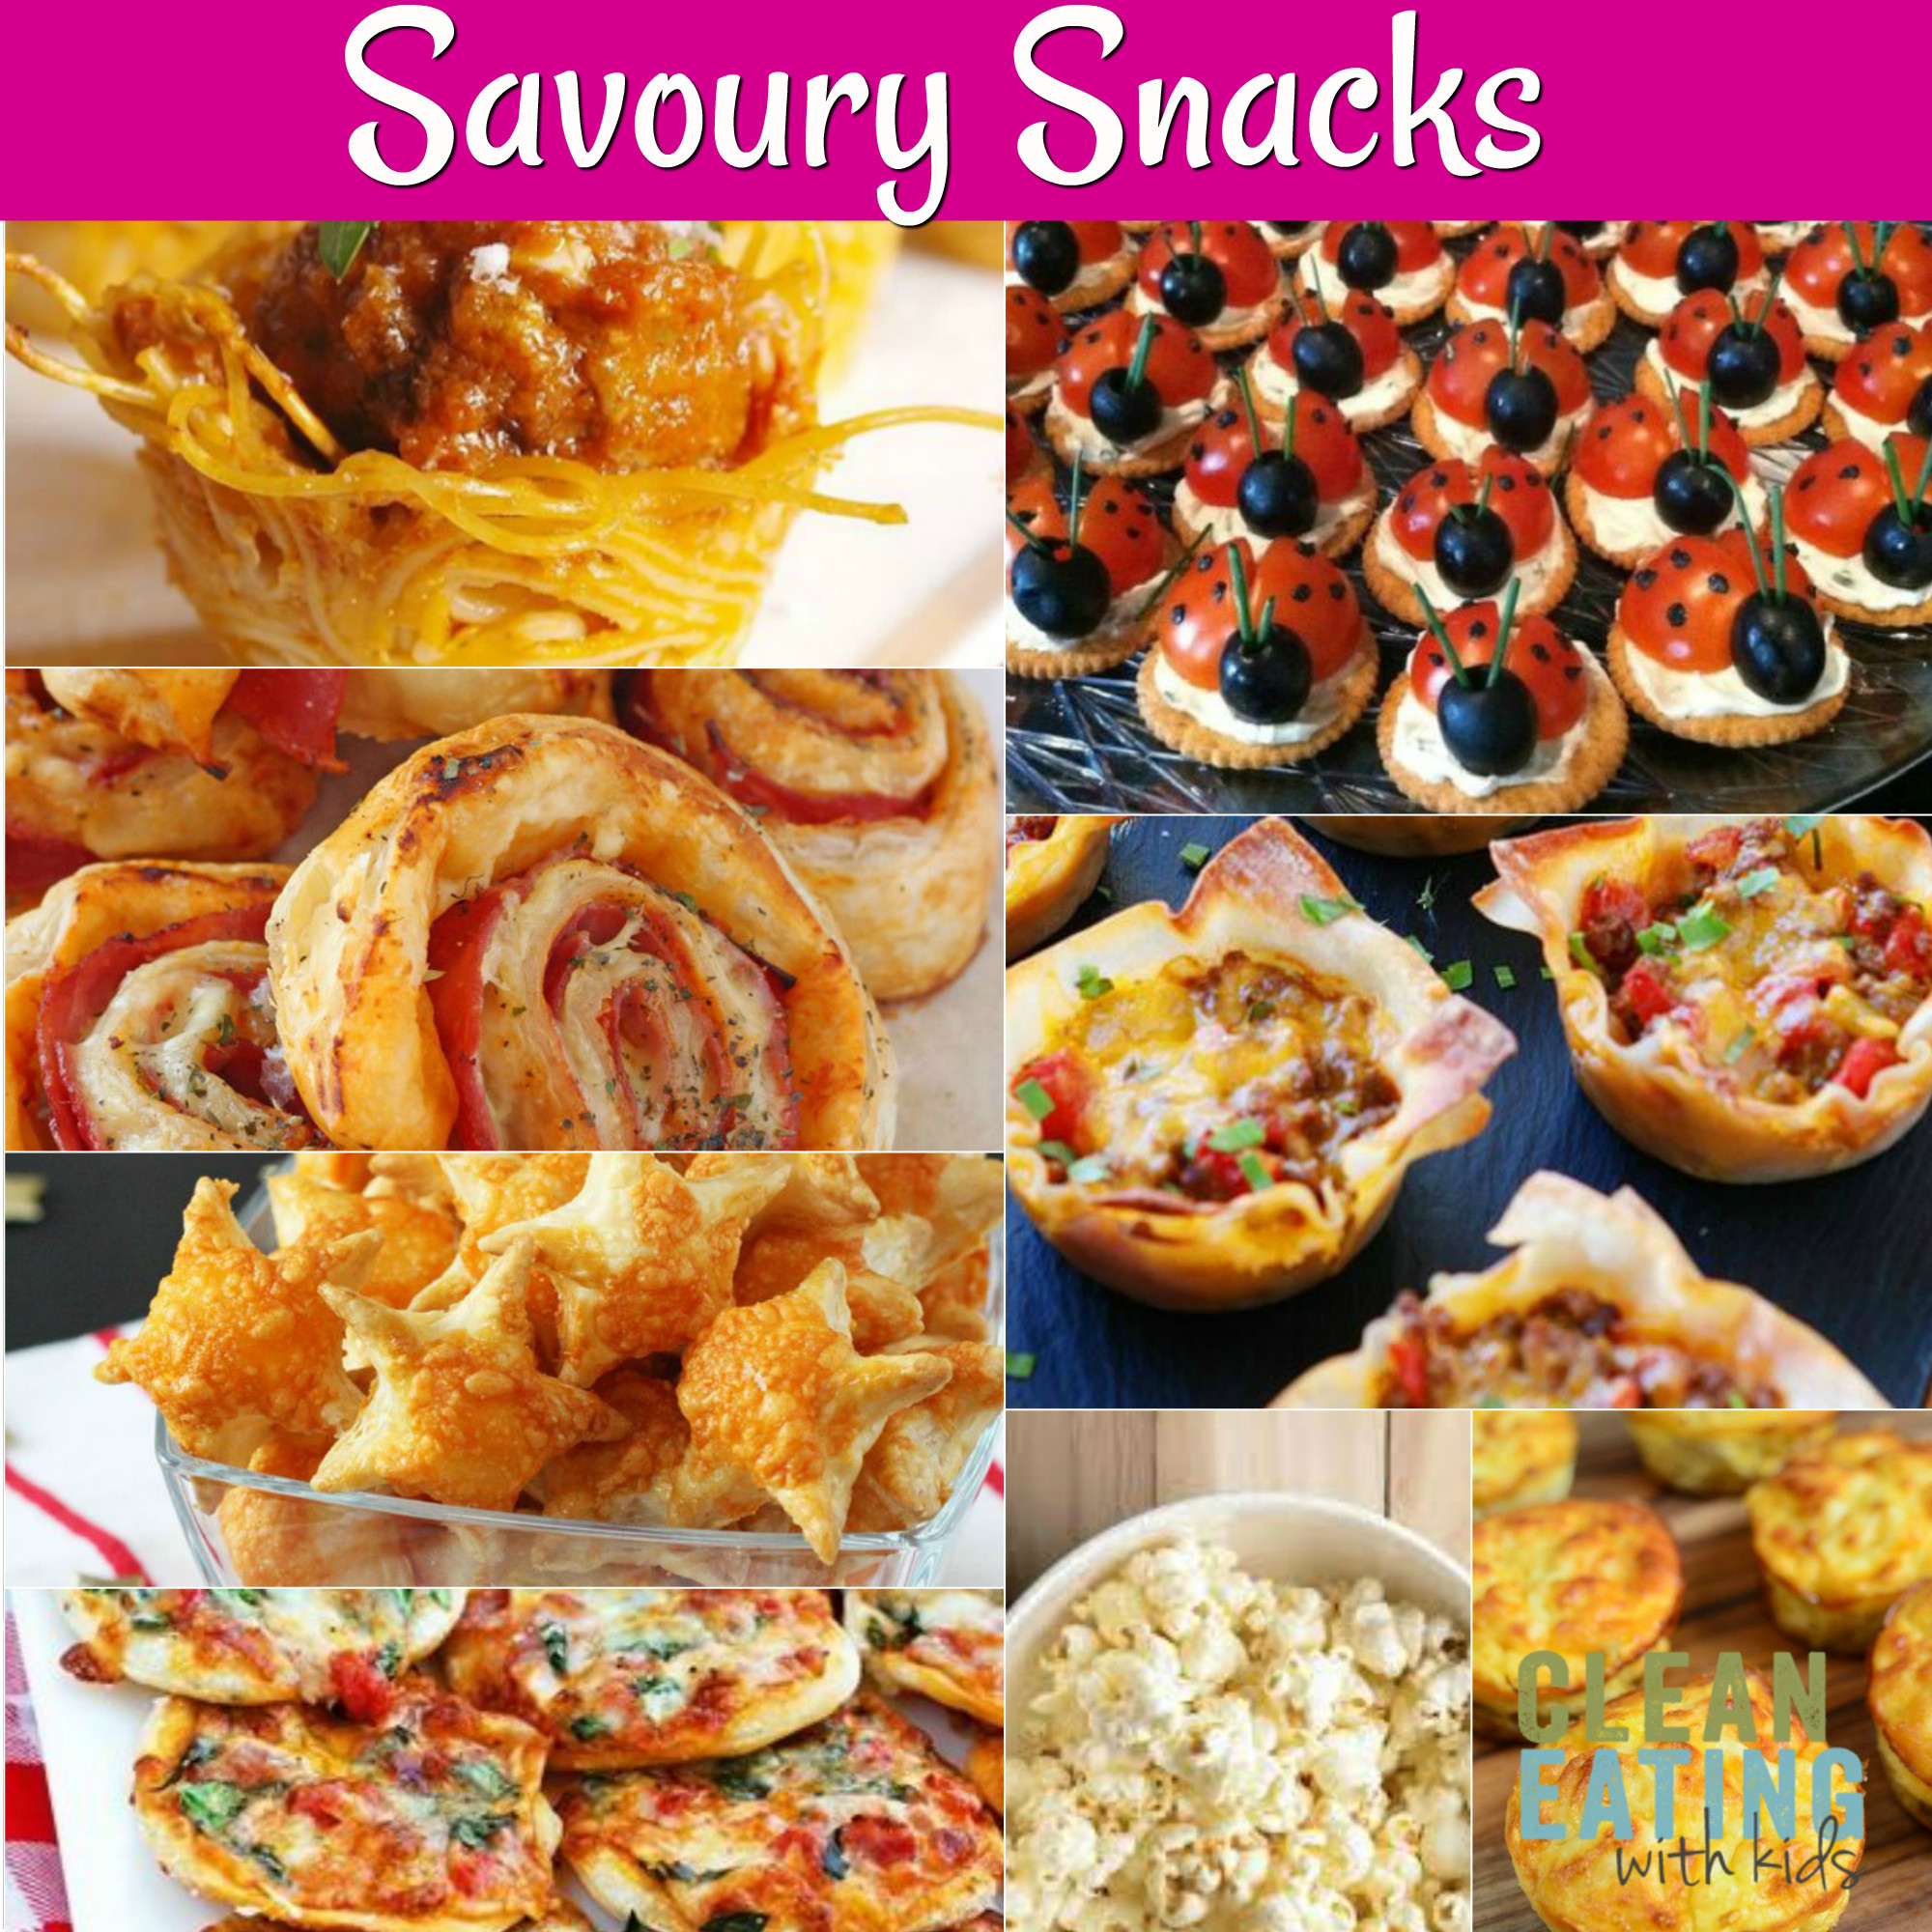 Kids Bday Party Snacks
 25 Healthy Birthday Party Food Ideas Clean Eating with kids